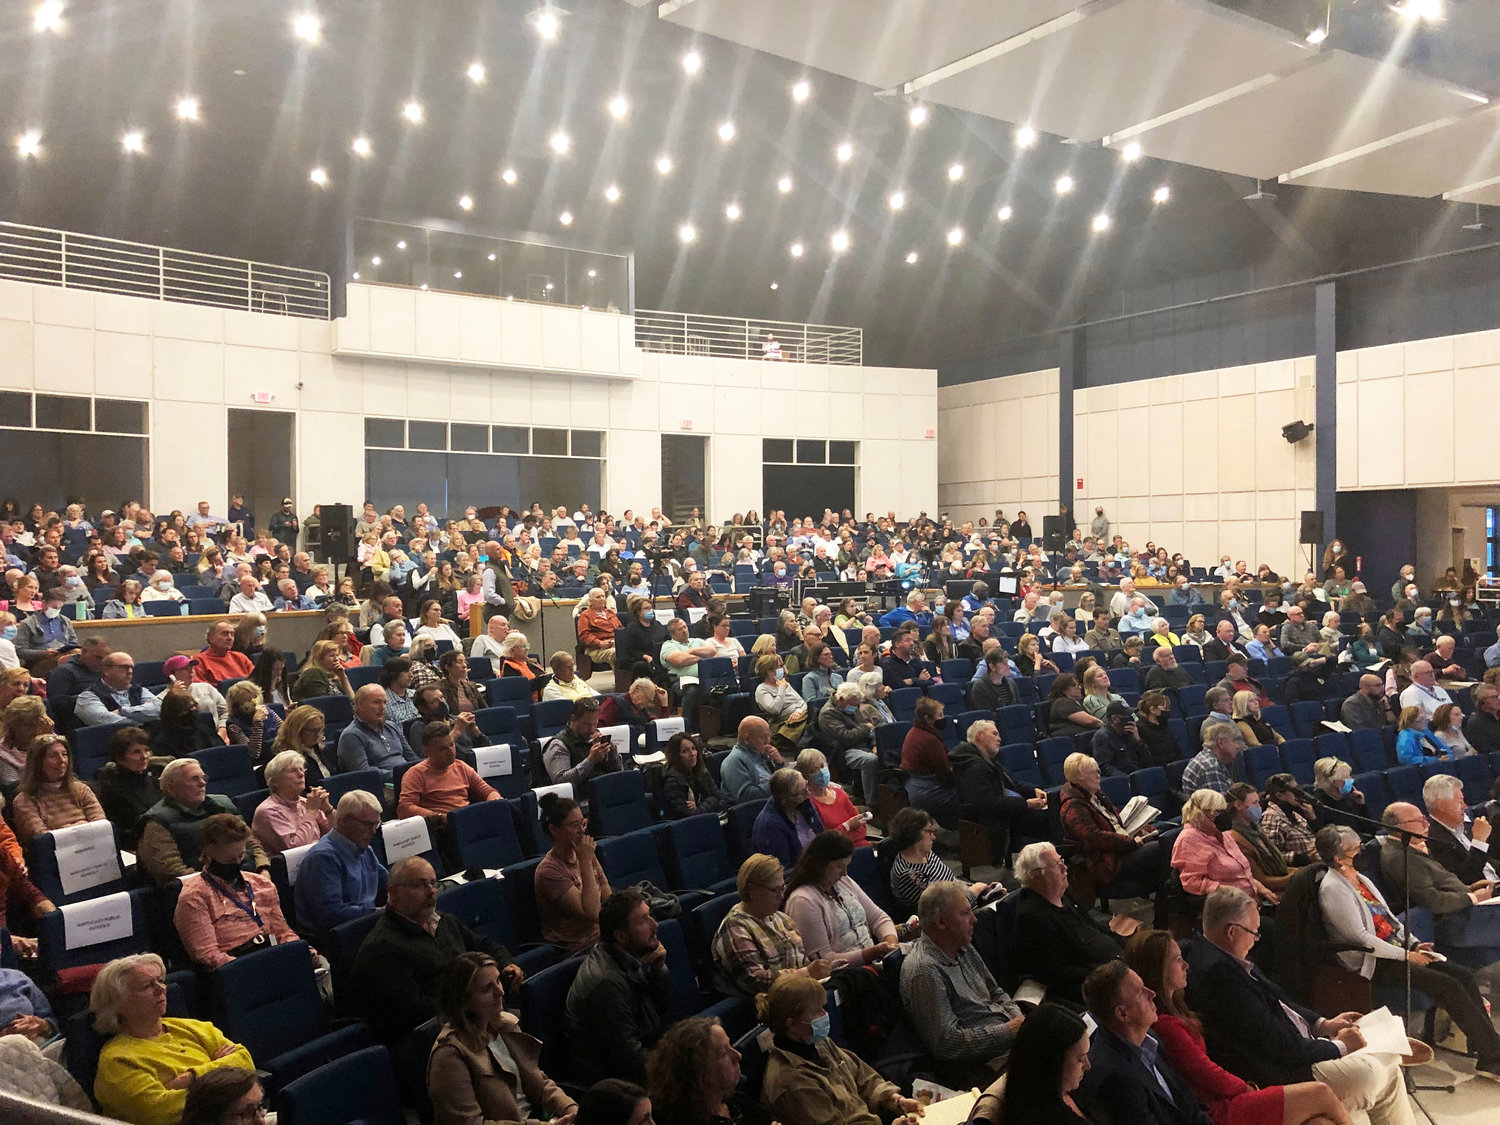 Town Meeting voters fill most of the seats in the Nantucket High School auditorium before voting on allowing anyone to go topless on island beaches Tuesday night.